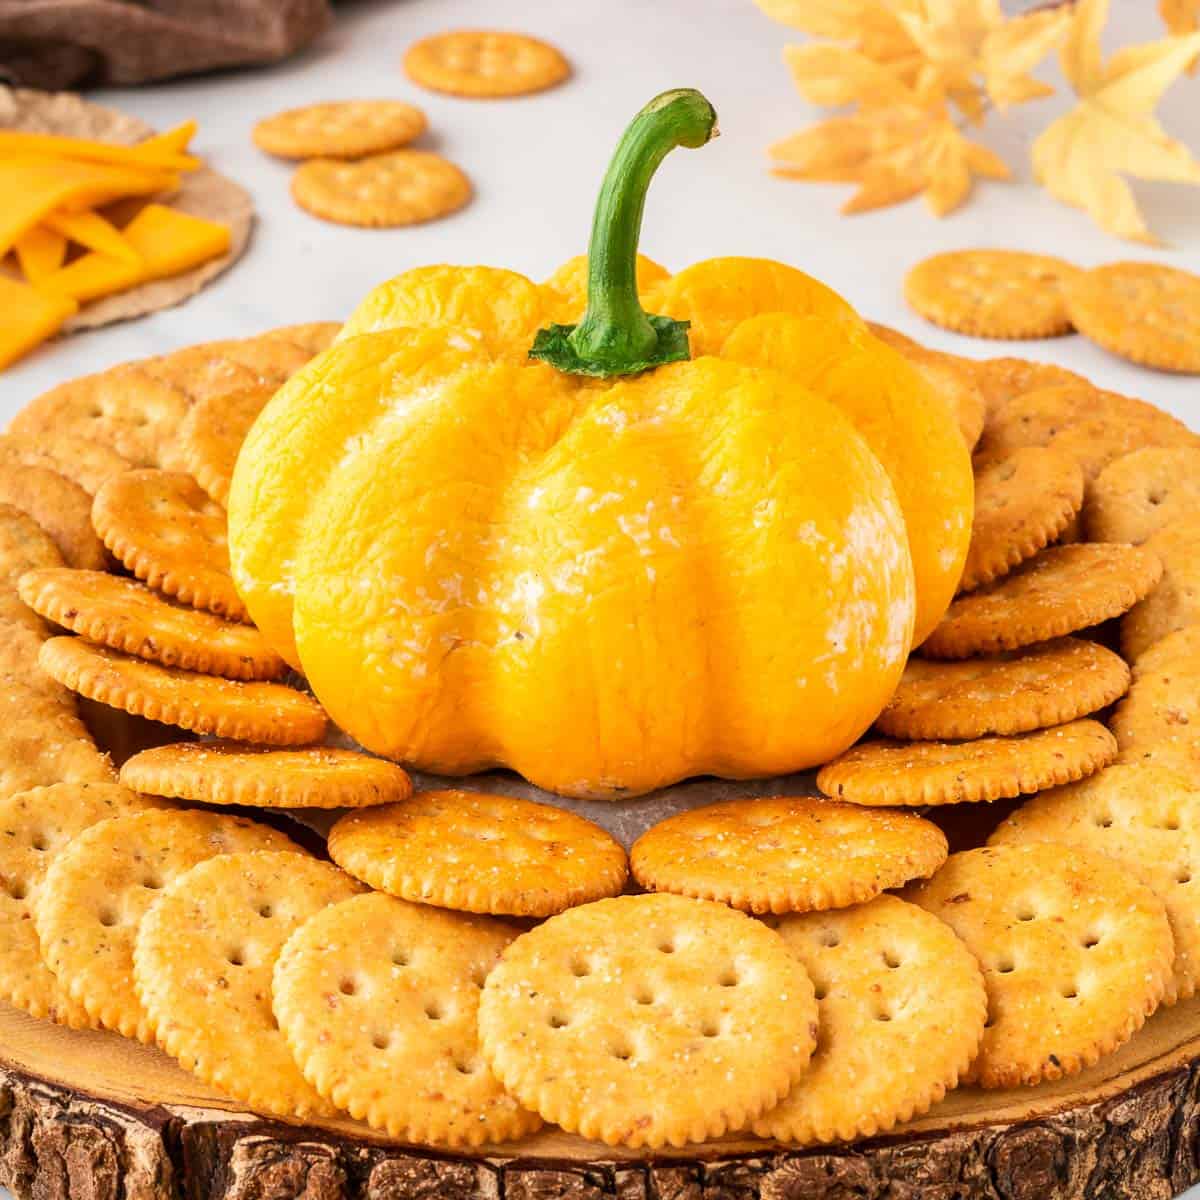 pumpkin shaped cheese ball surrounded by crackers for dipping